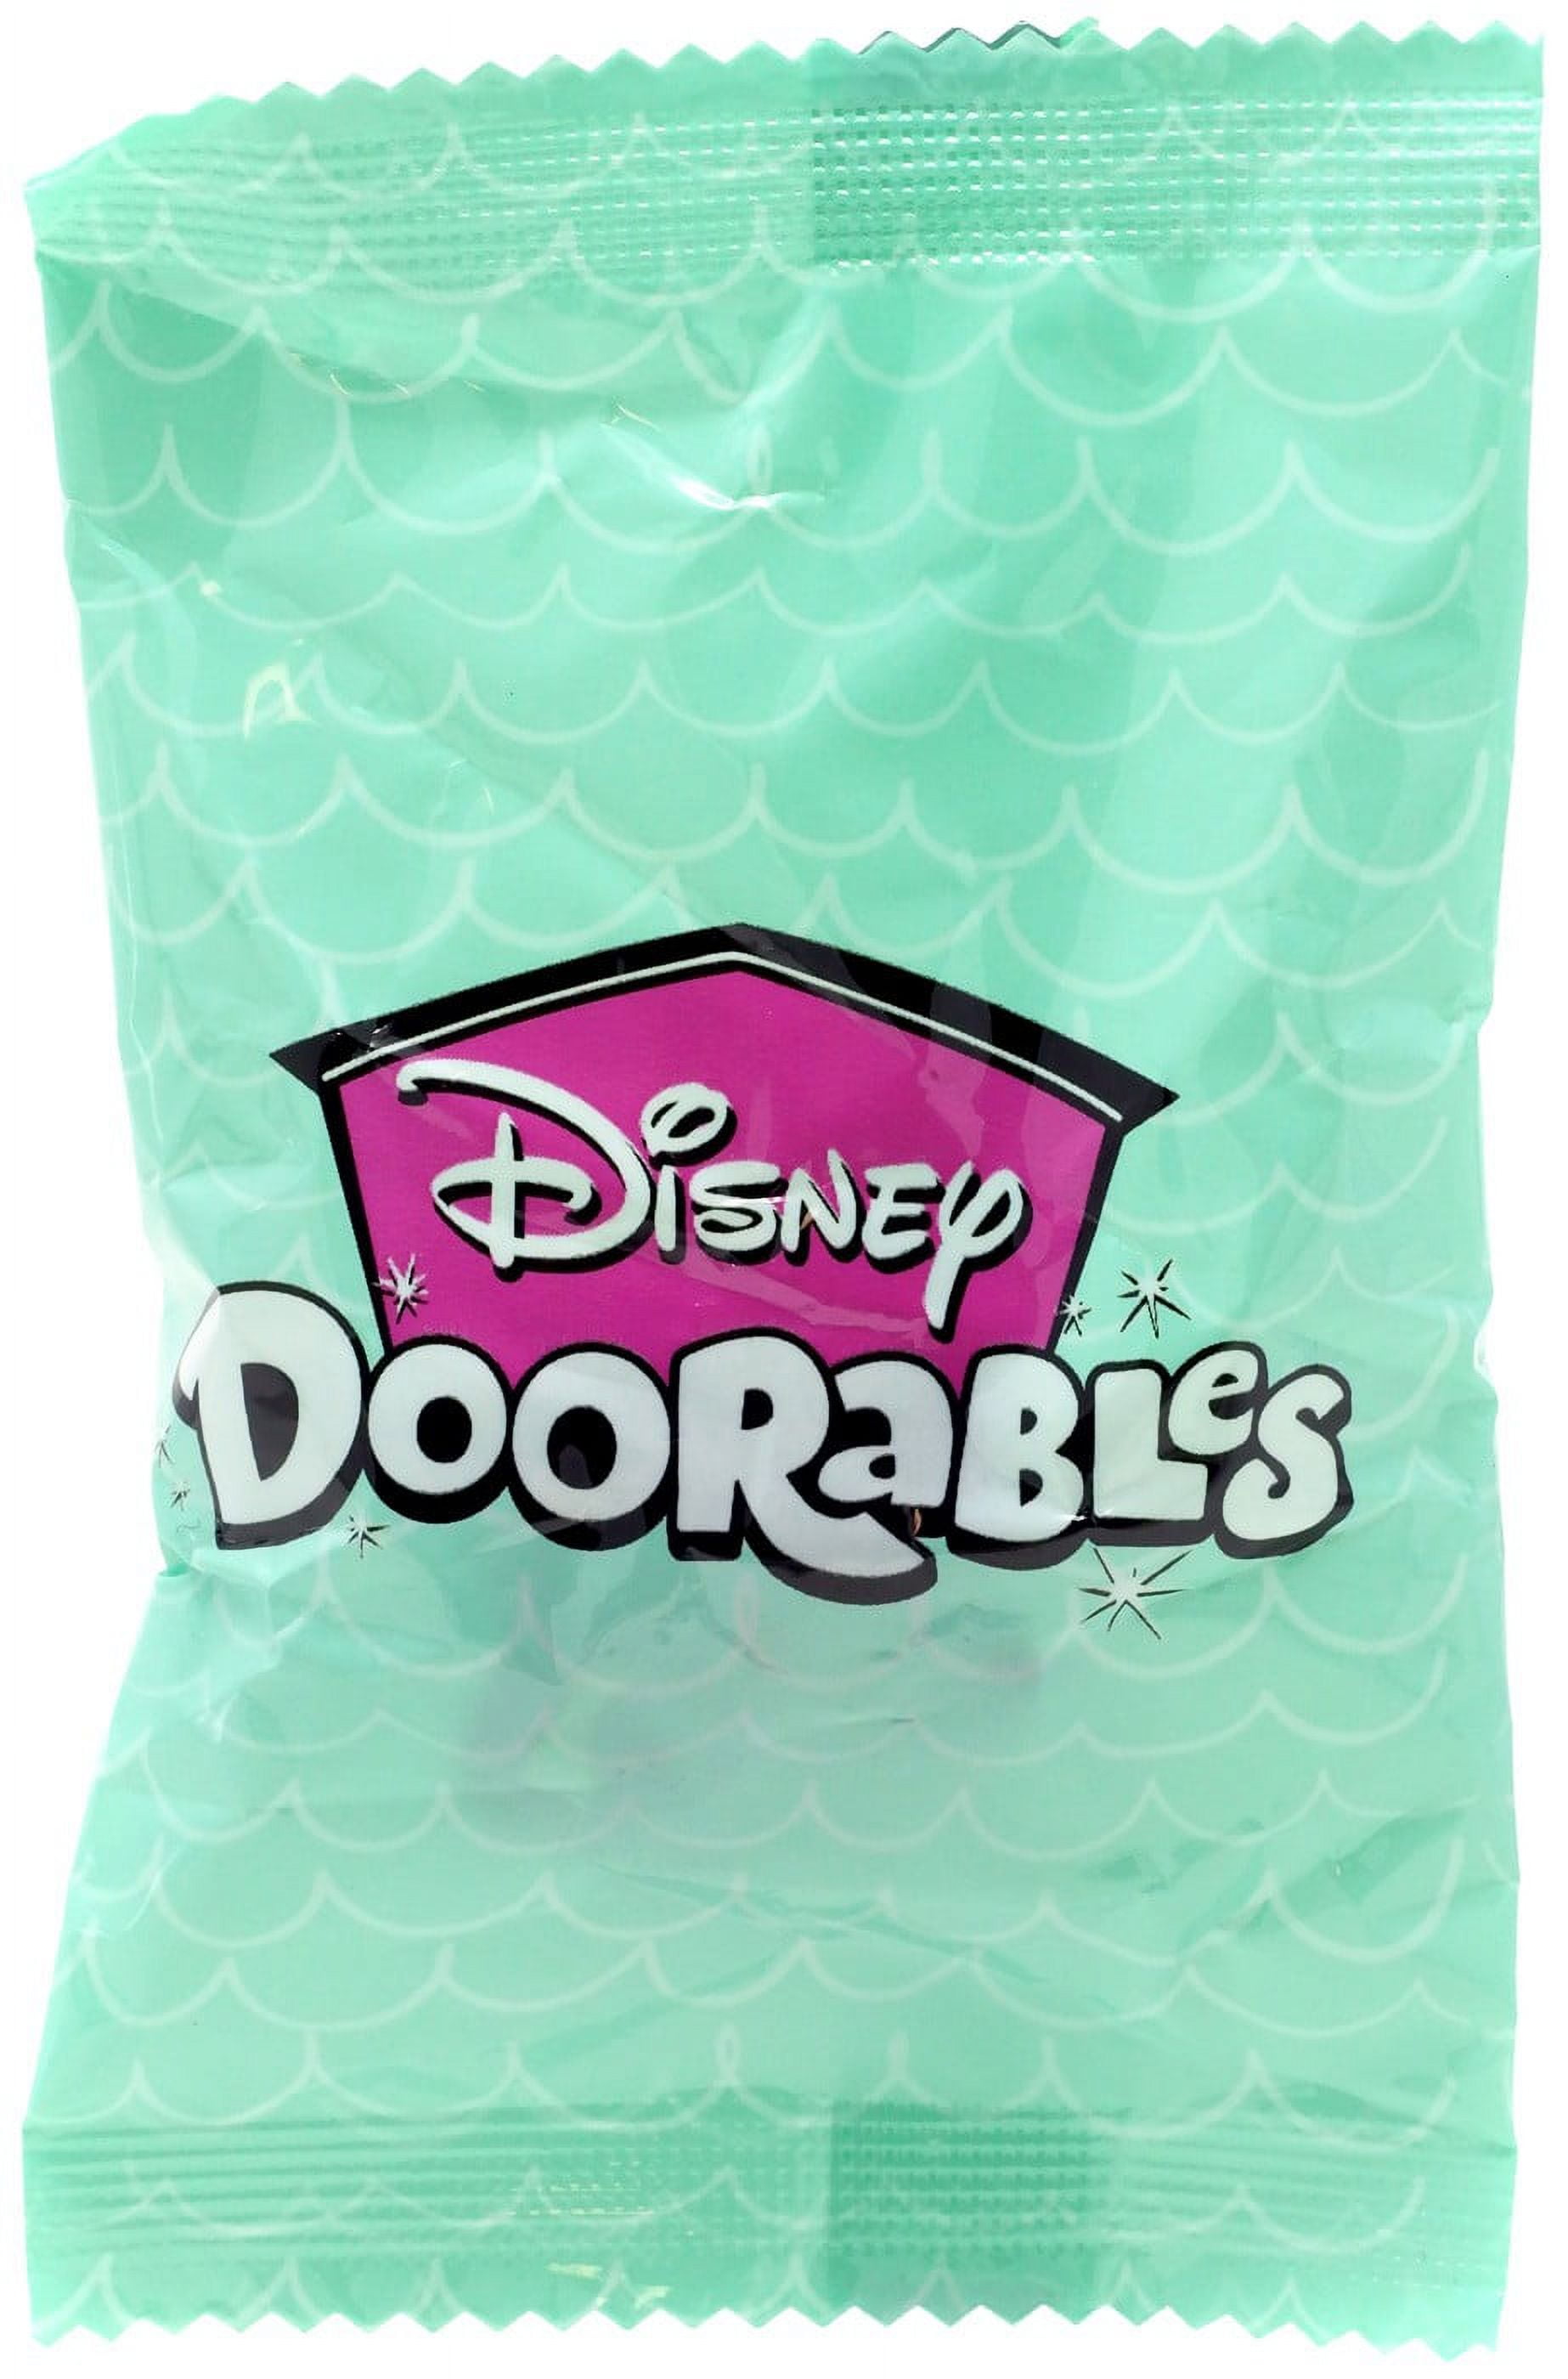 Disney Doorables Stitch Collection Peek, Officially Licensed Kids Toys for  Ages 5 Up by Just Play